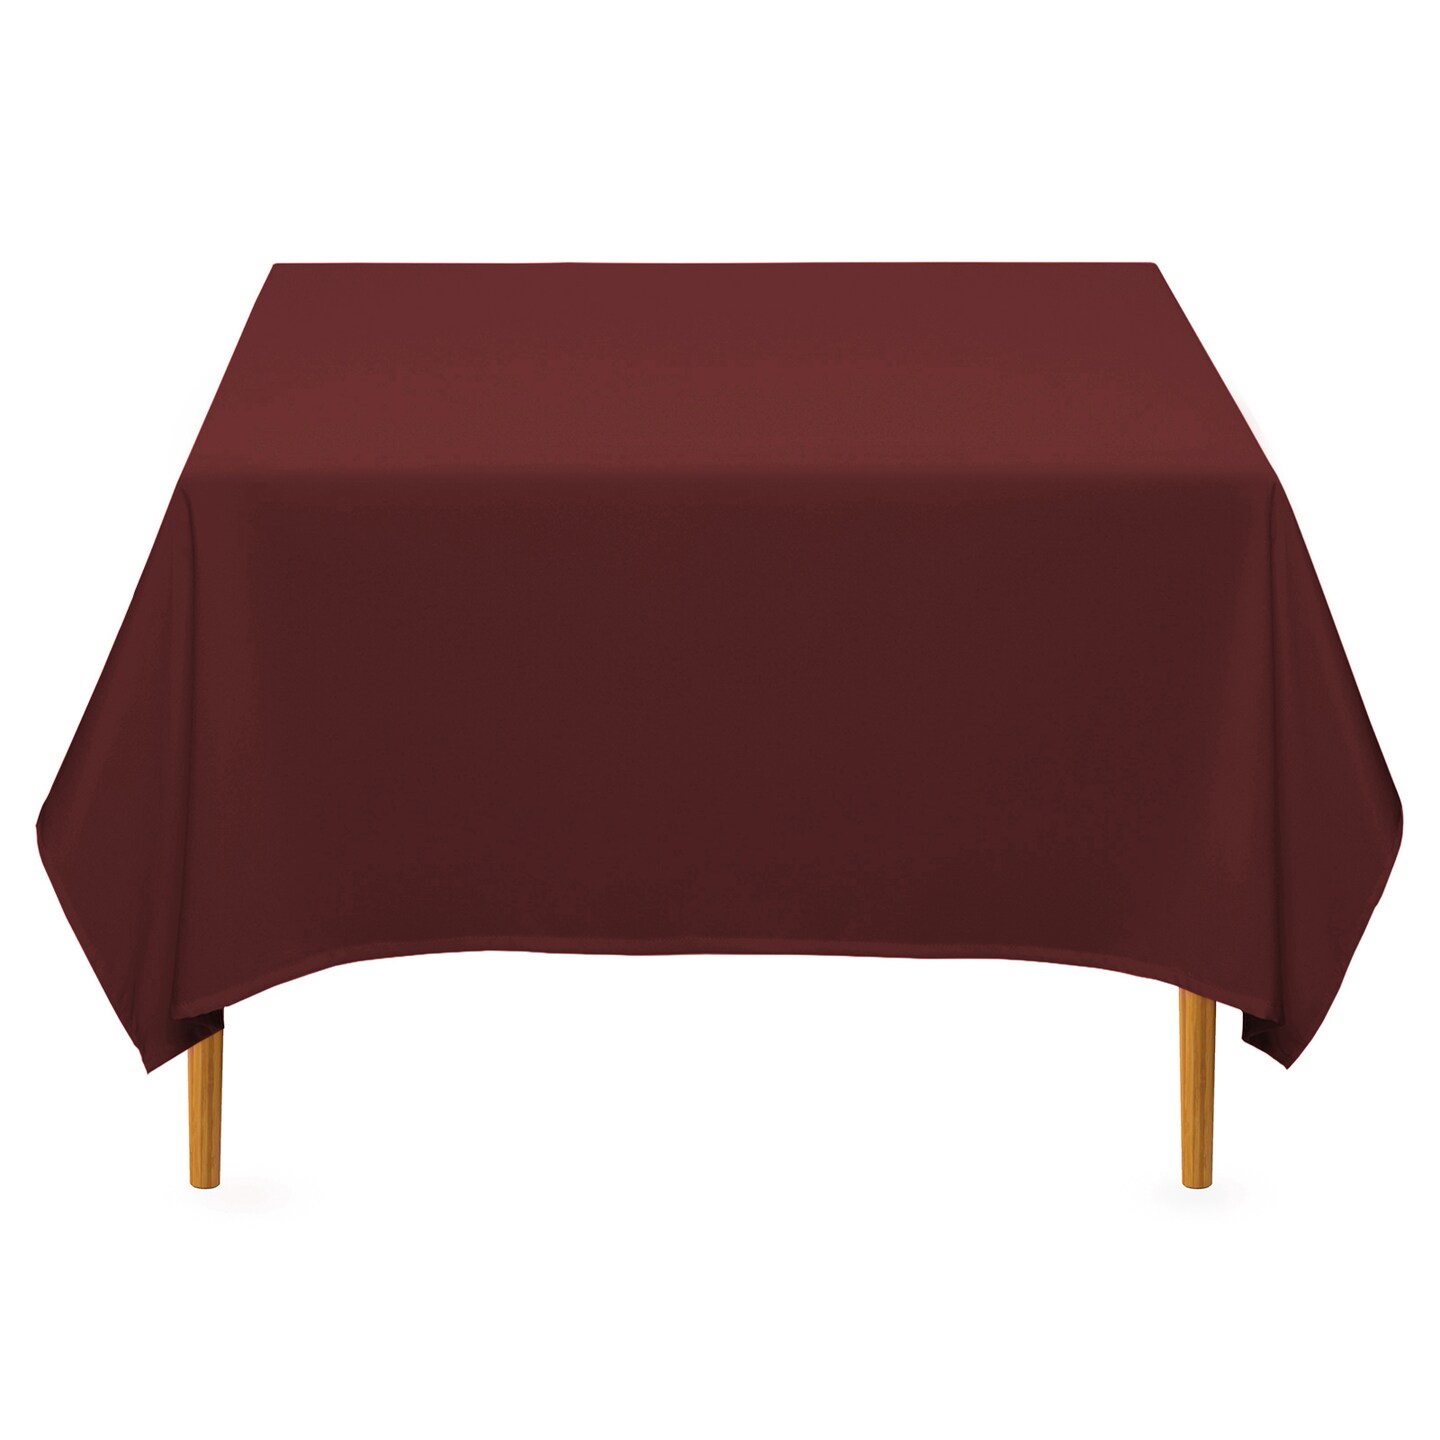 Lann's Linens - 10 Premium Square Tablecloths for Wedding / Banquet / Restaurant - Polyester Fabric Table Cloths